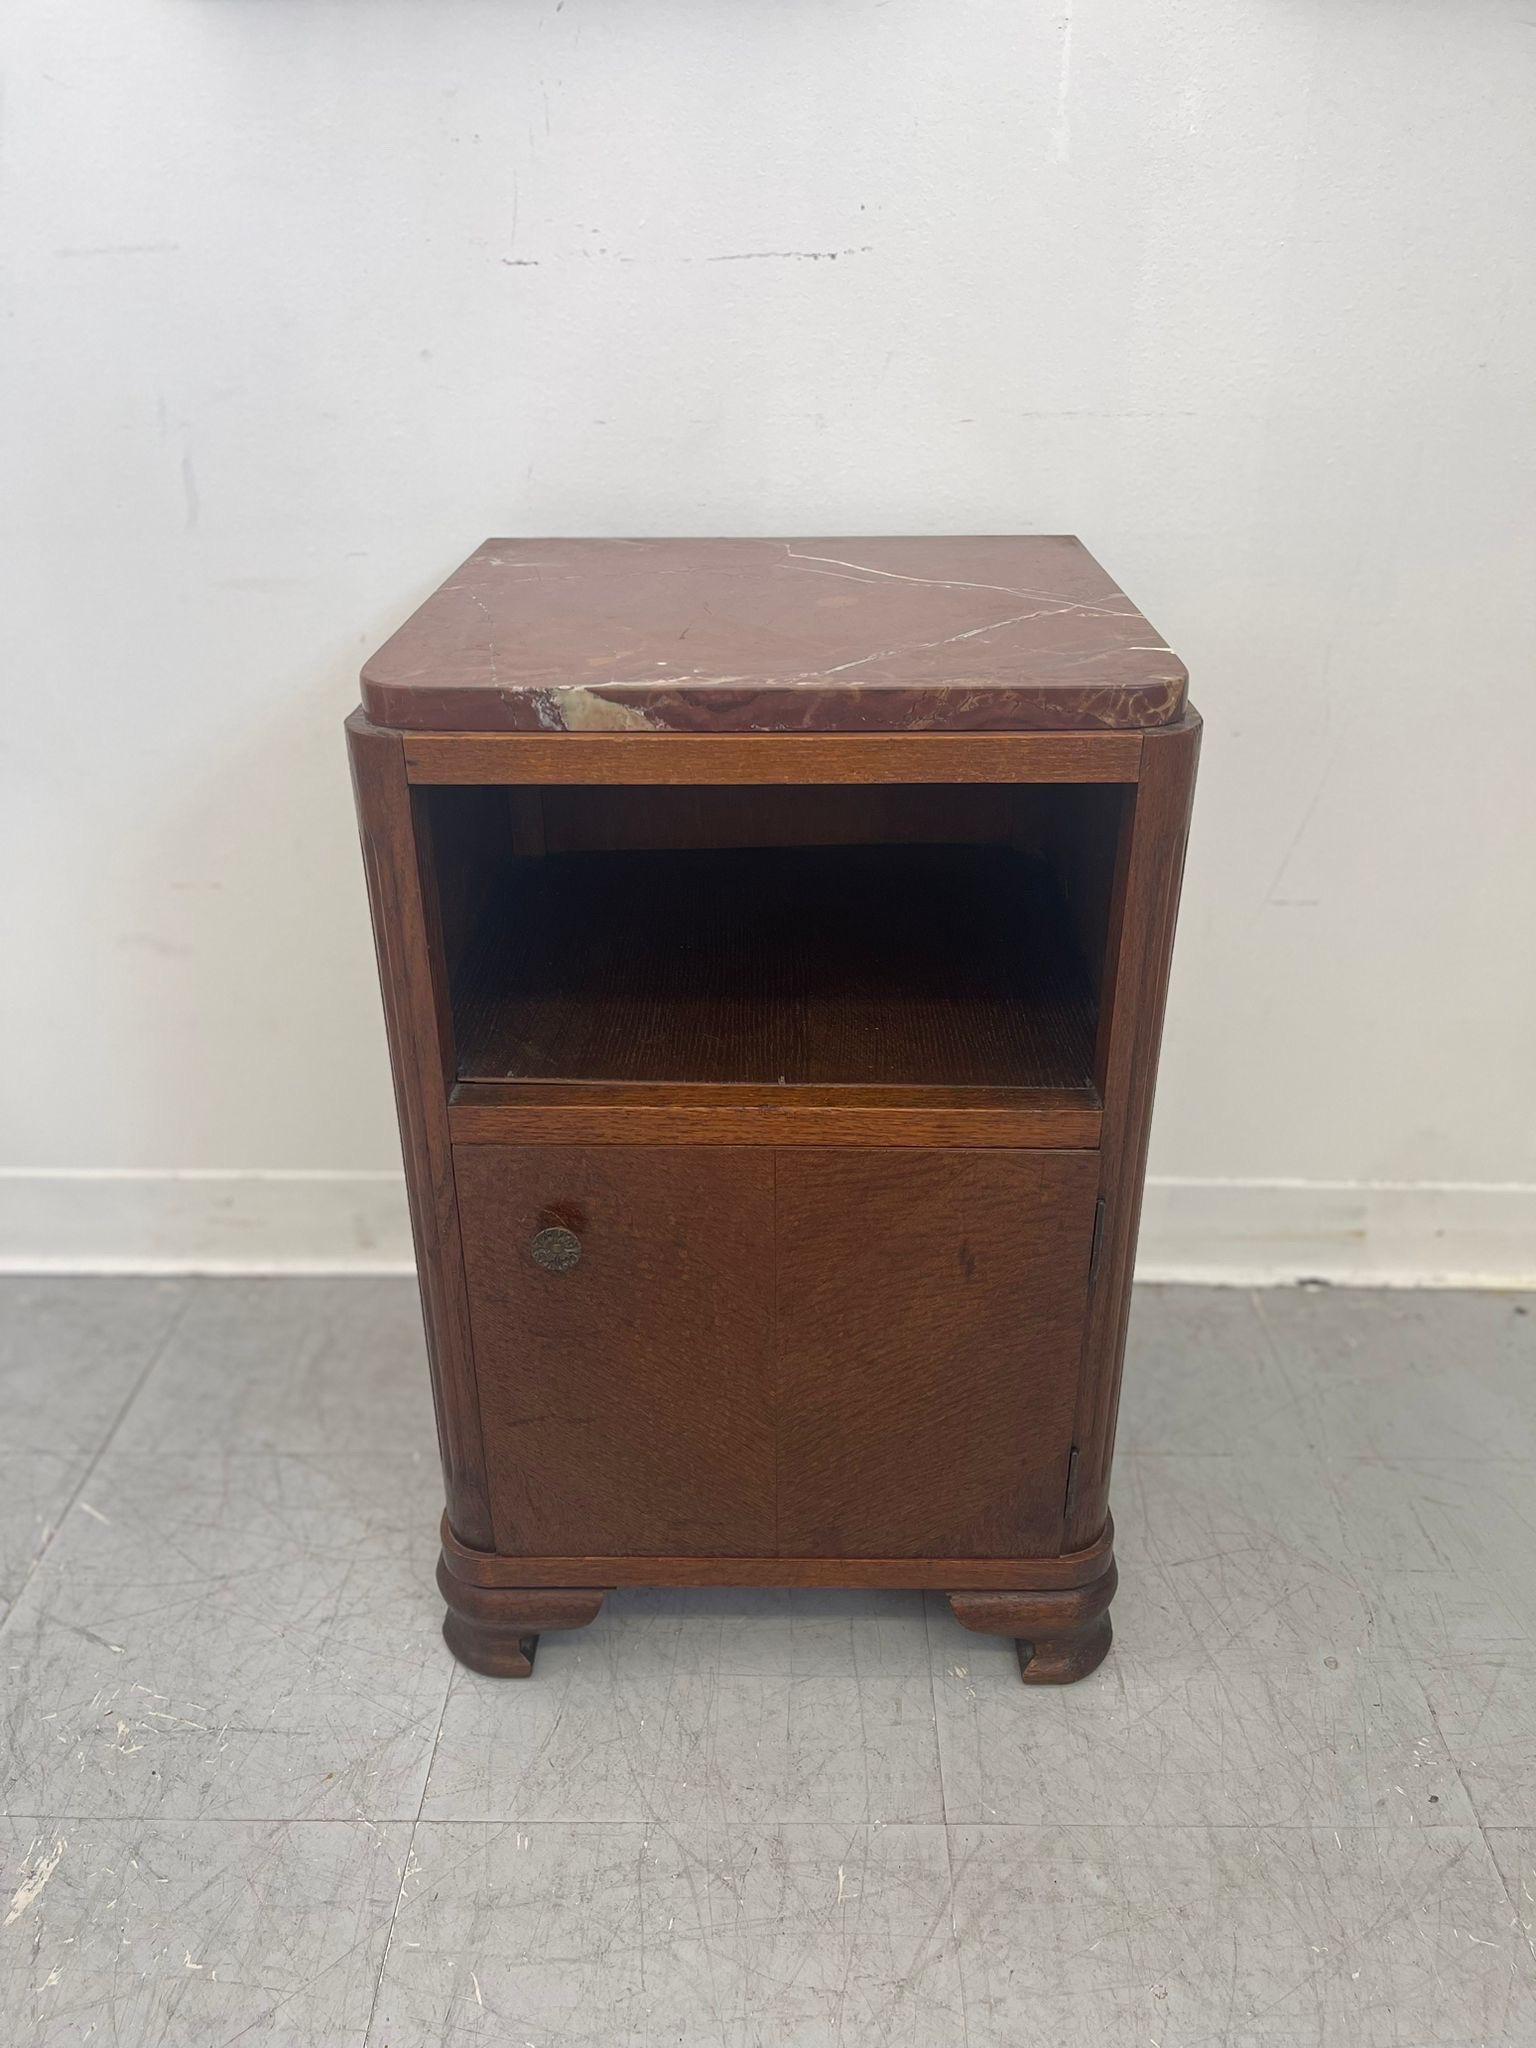 Original hardware to the cabinet door. One open shelf. The marble top is removable. Finished Back. Wood carving details to the corners, interesting shape to the feet. Wood has shaped beautifully. Vintage Condition Consistent with Age as